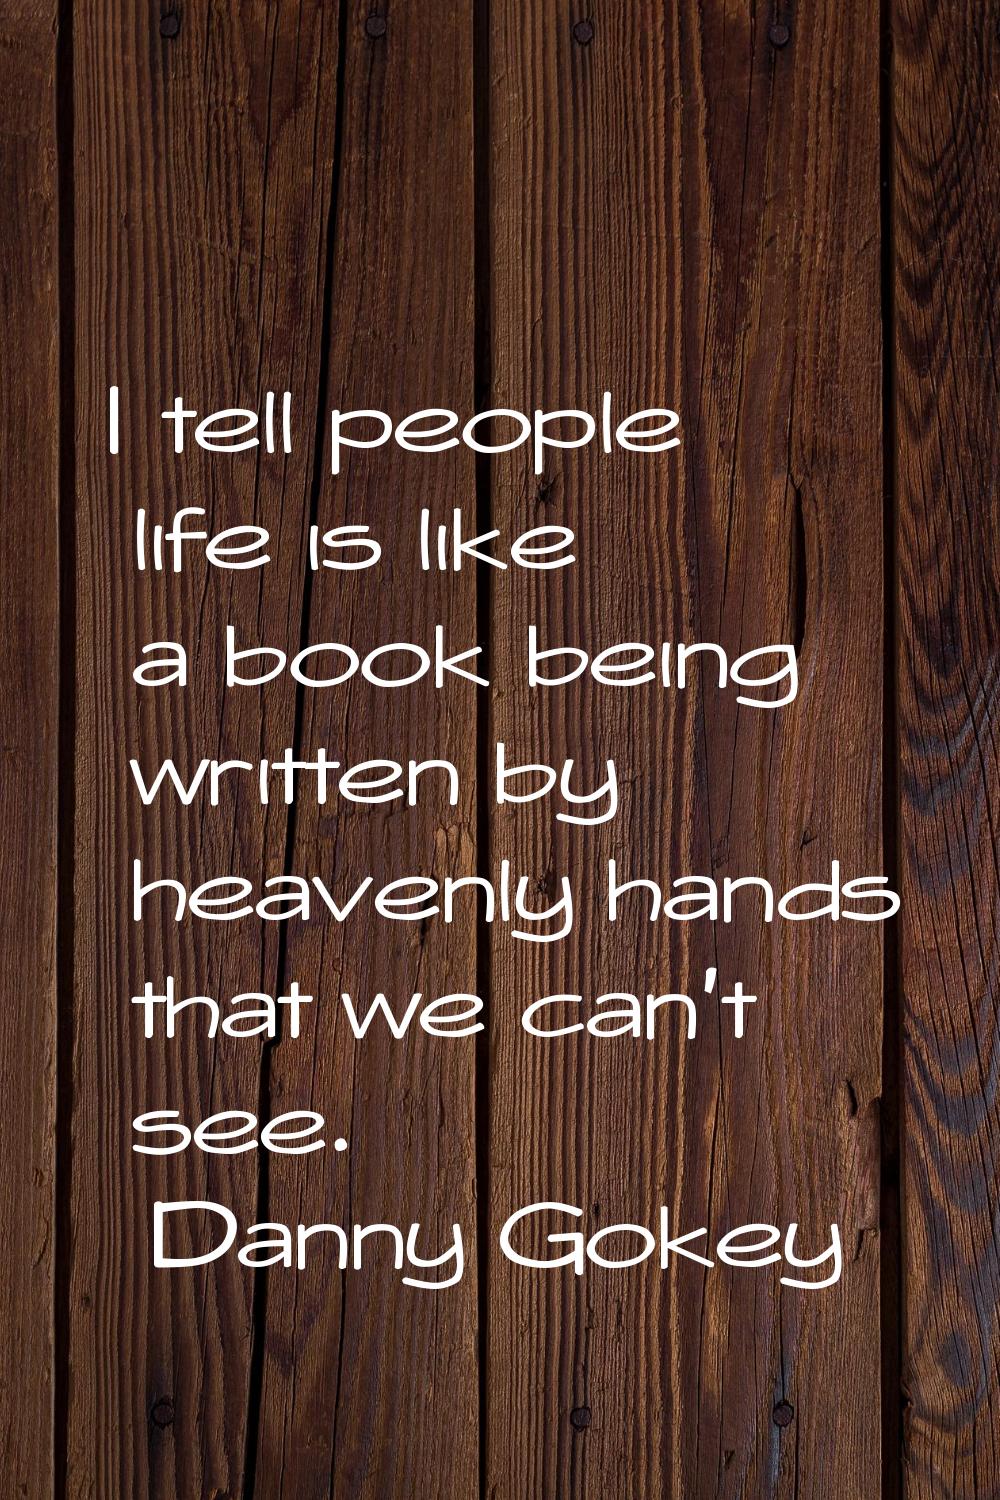 I tell people life is like a book being written by heavenly hands that we can't see.